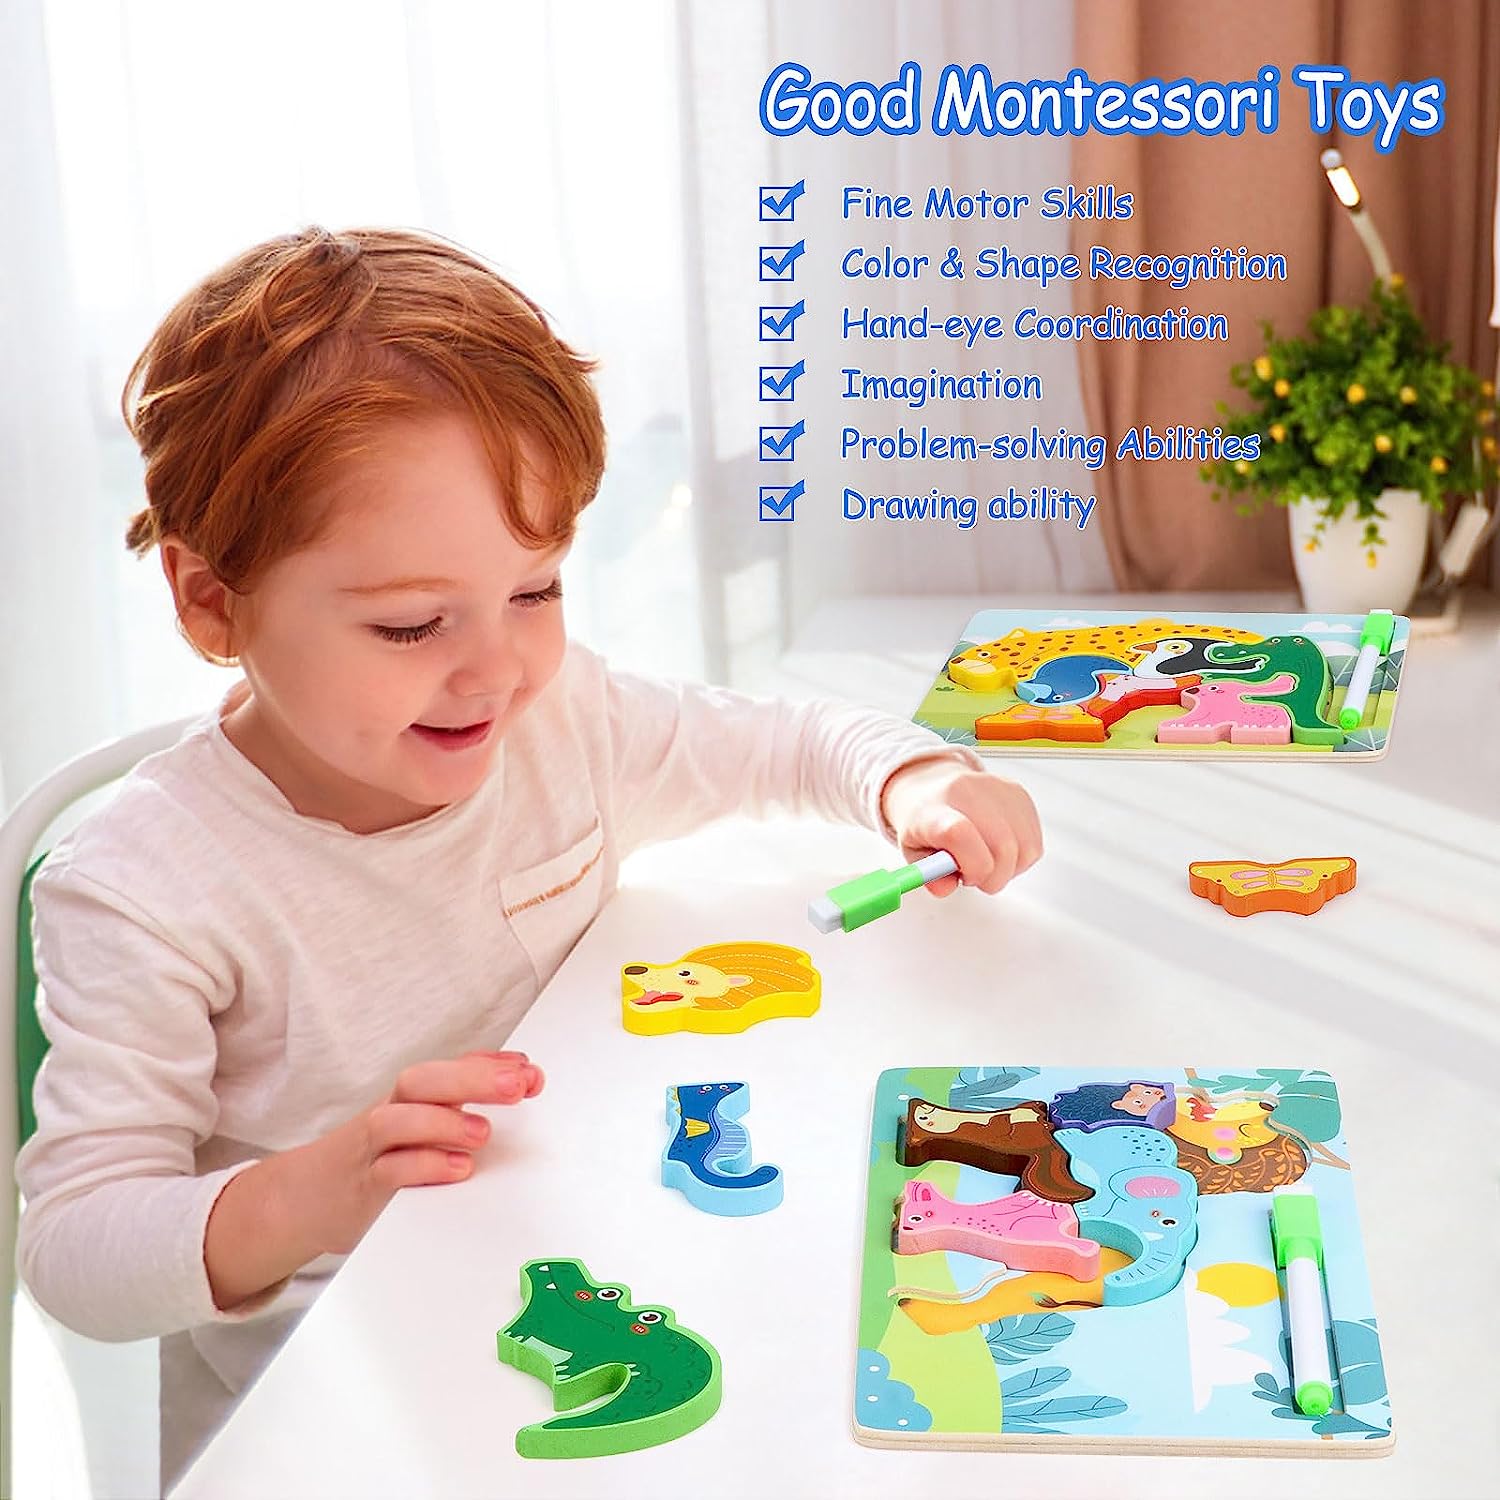 Wooden Puzzles for 3 4 5 Year Old Boys and Girls, Wooden Animal Puzzles as Toys for Boys and Girls Ages 3-6, 6 Animal-Shaped Puzzles for Infants and Toddlers Educational Toys